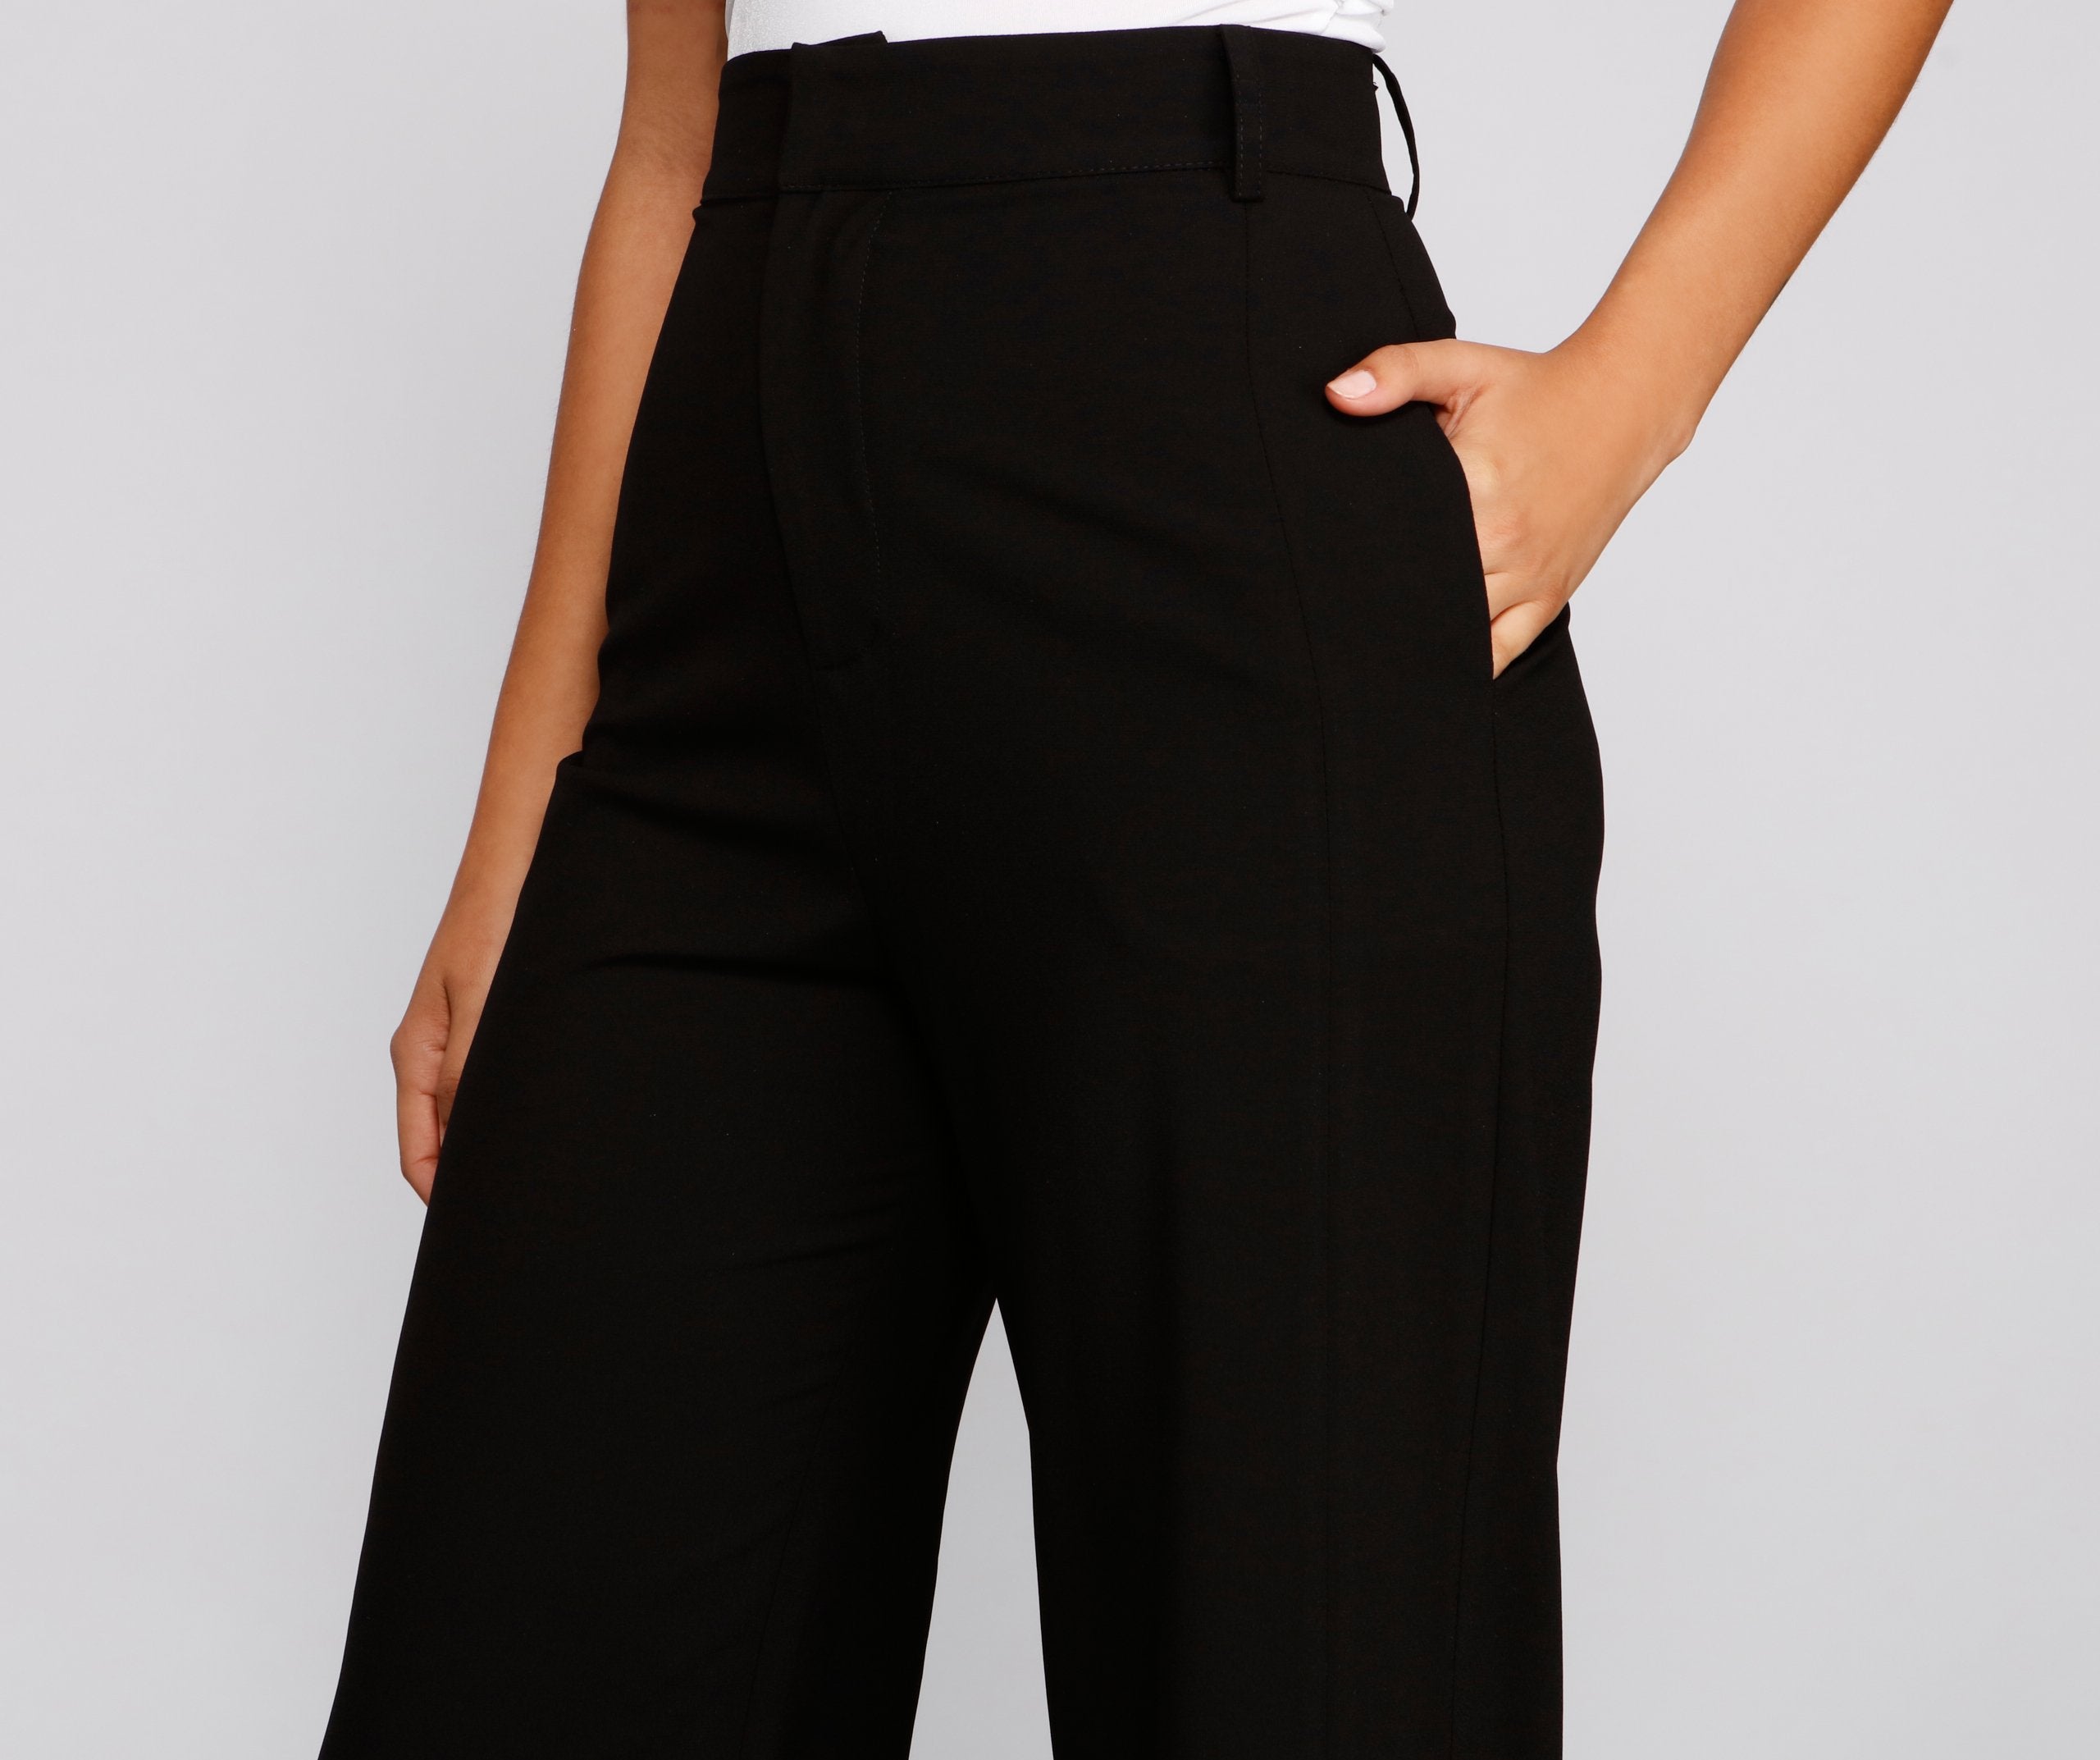 Bring The Flare High Waist Pants